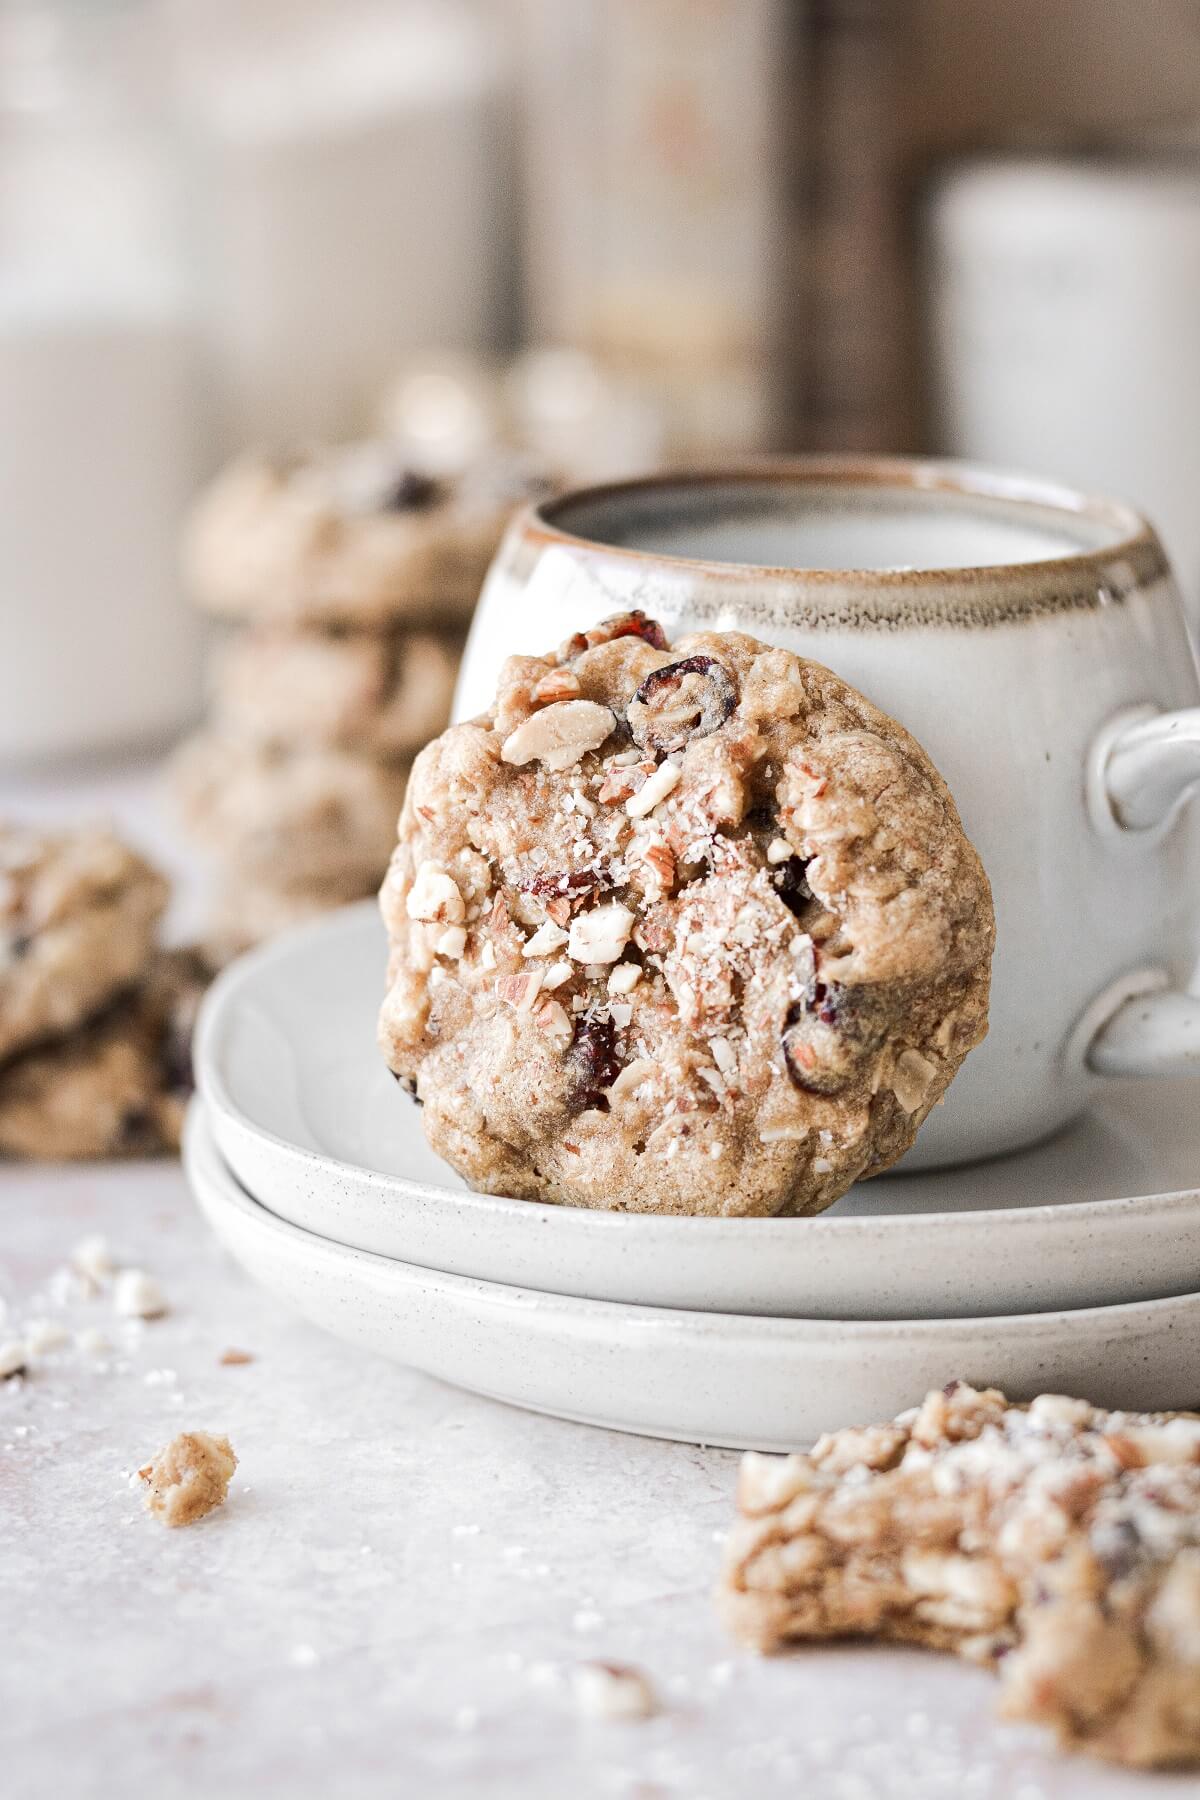 A cranberry almond oatmeal cookie, resting against a coffee cup.